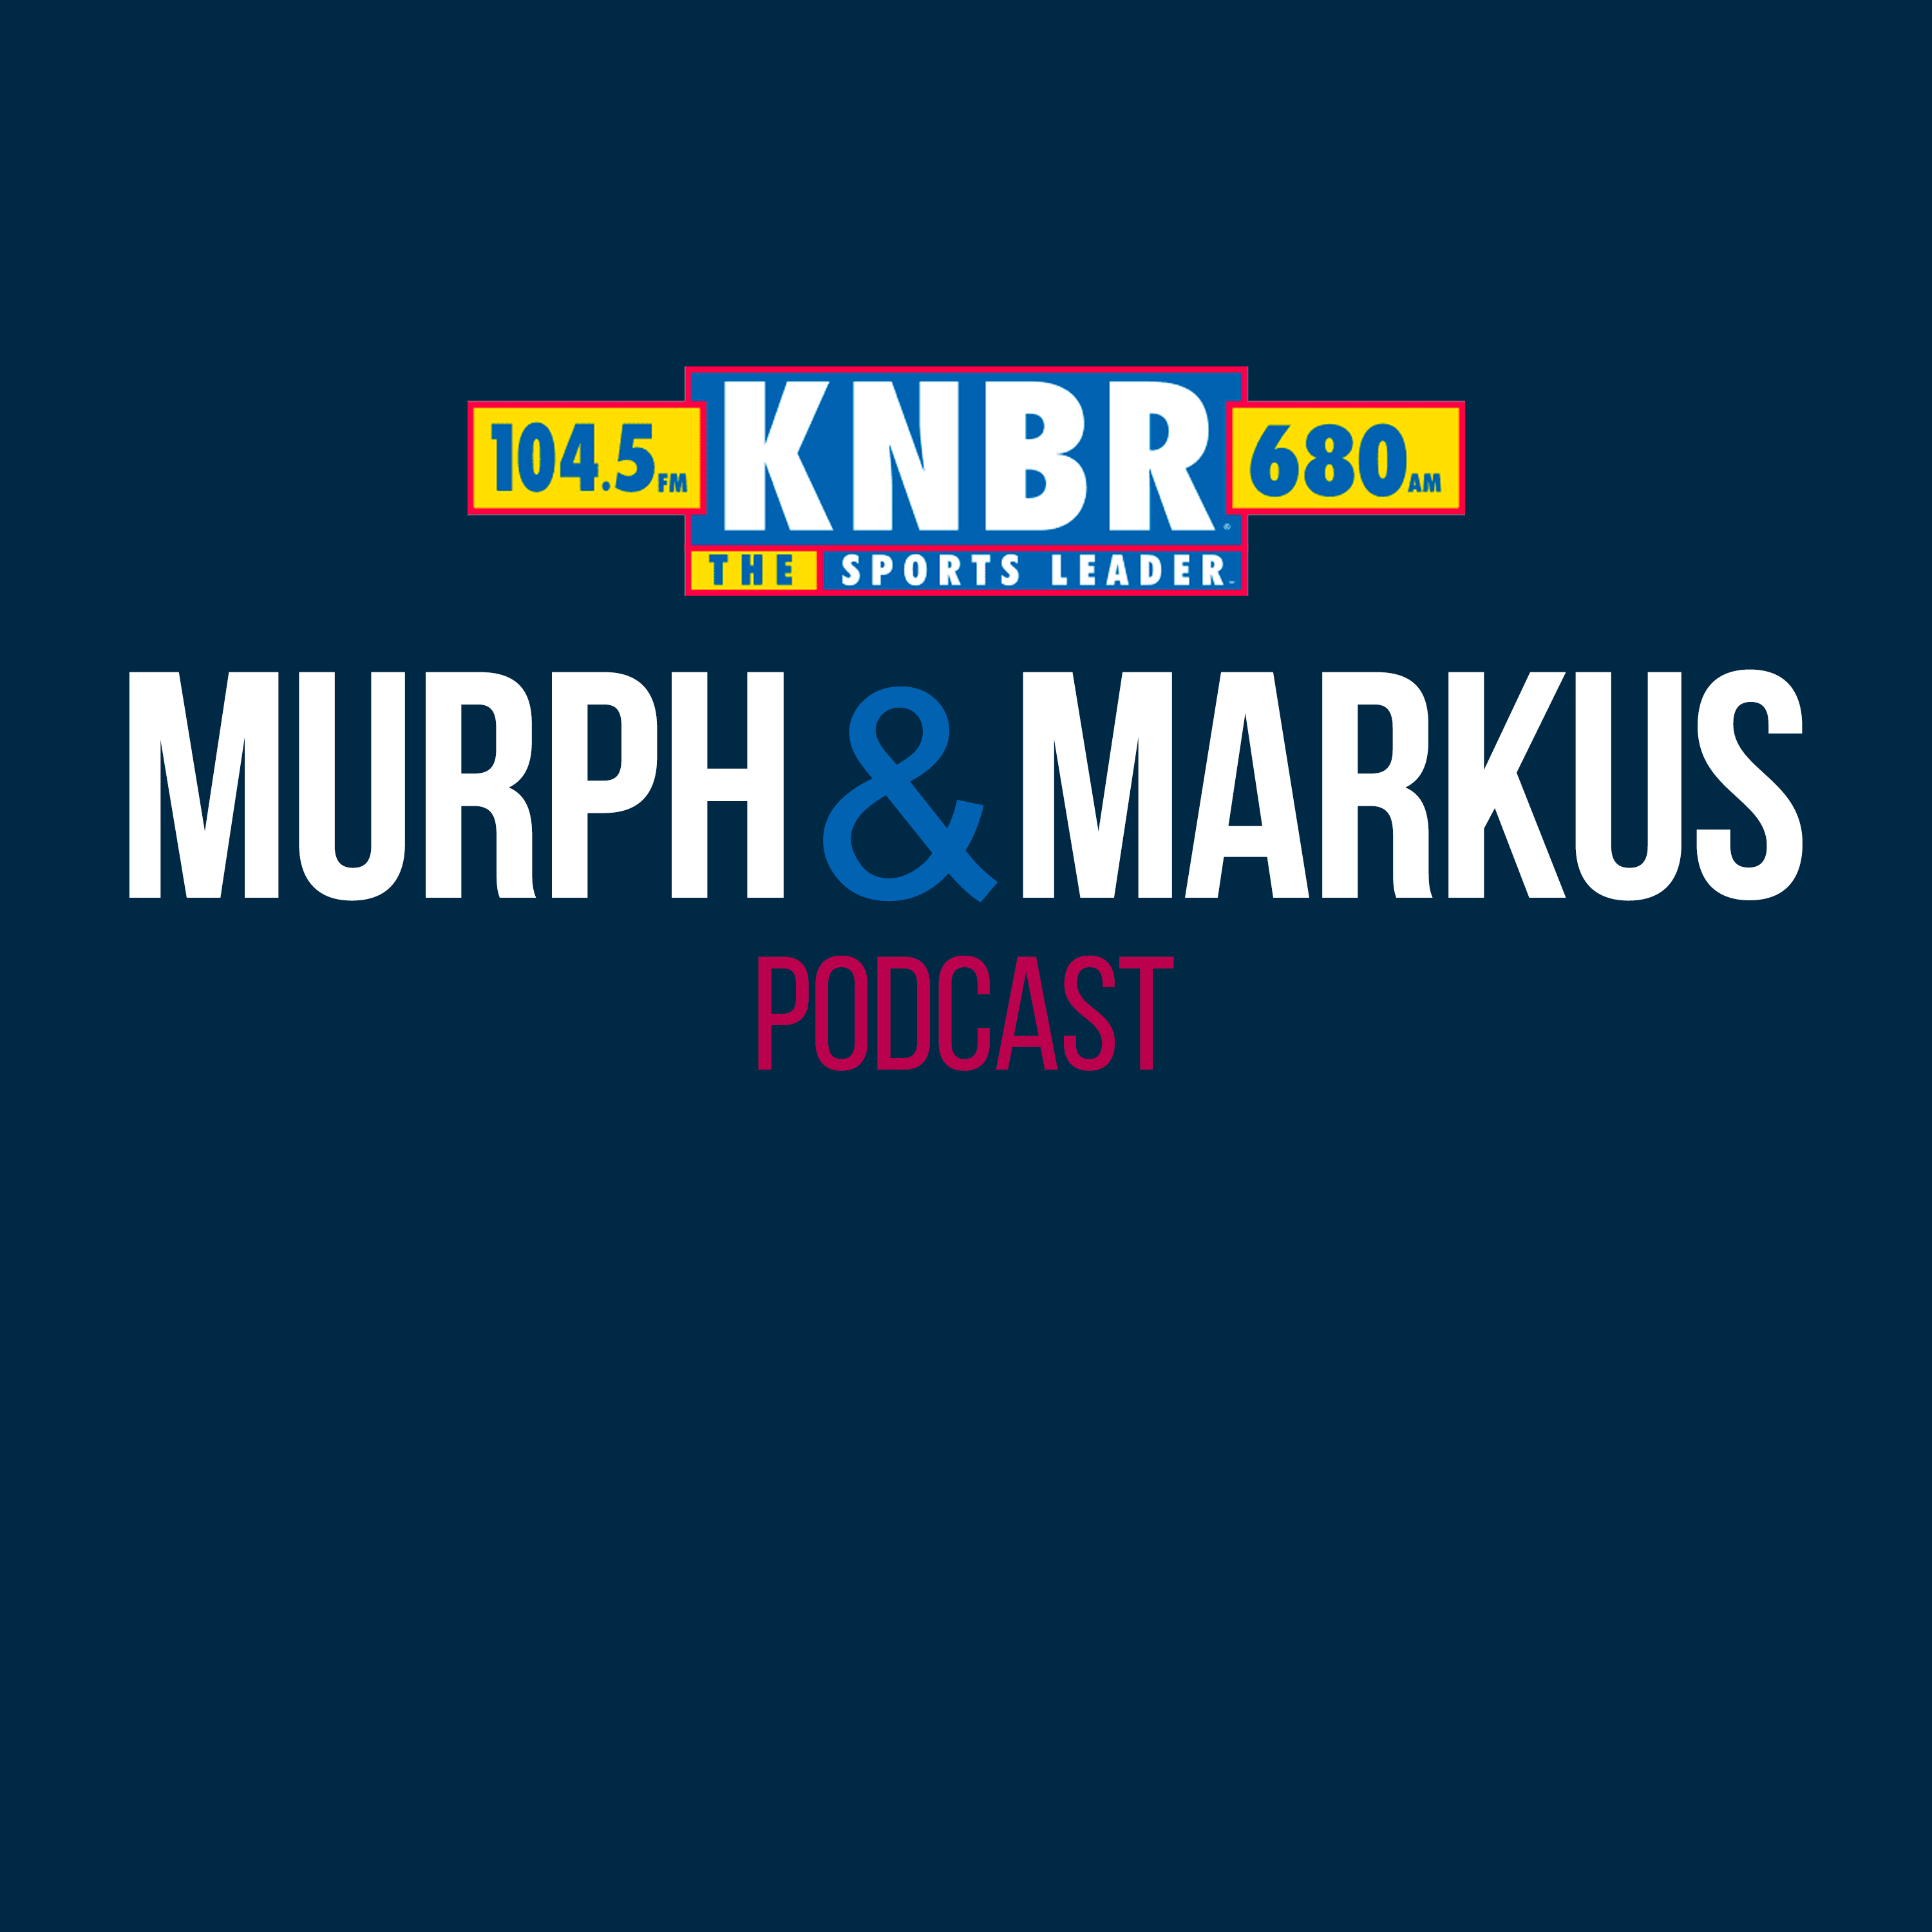 Mike Krukow joined Murph and Markus show to discuss the Giants wins vs Atlanta and why this team is getting hot at the right time.